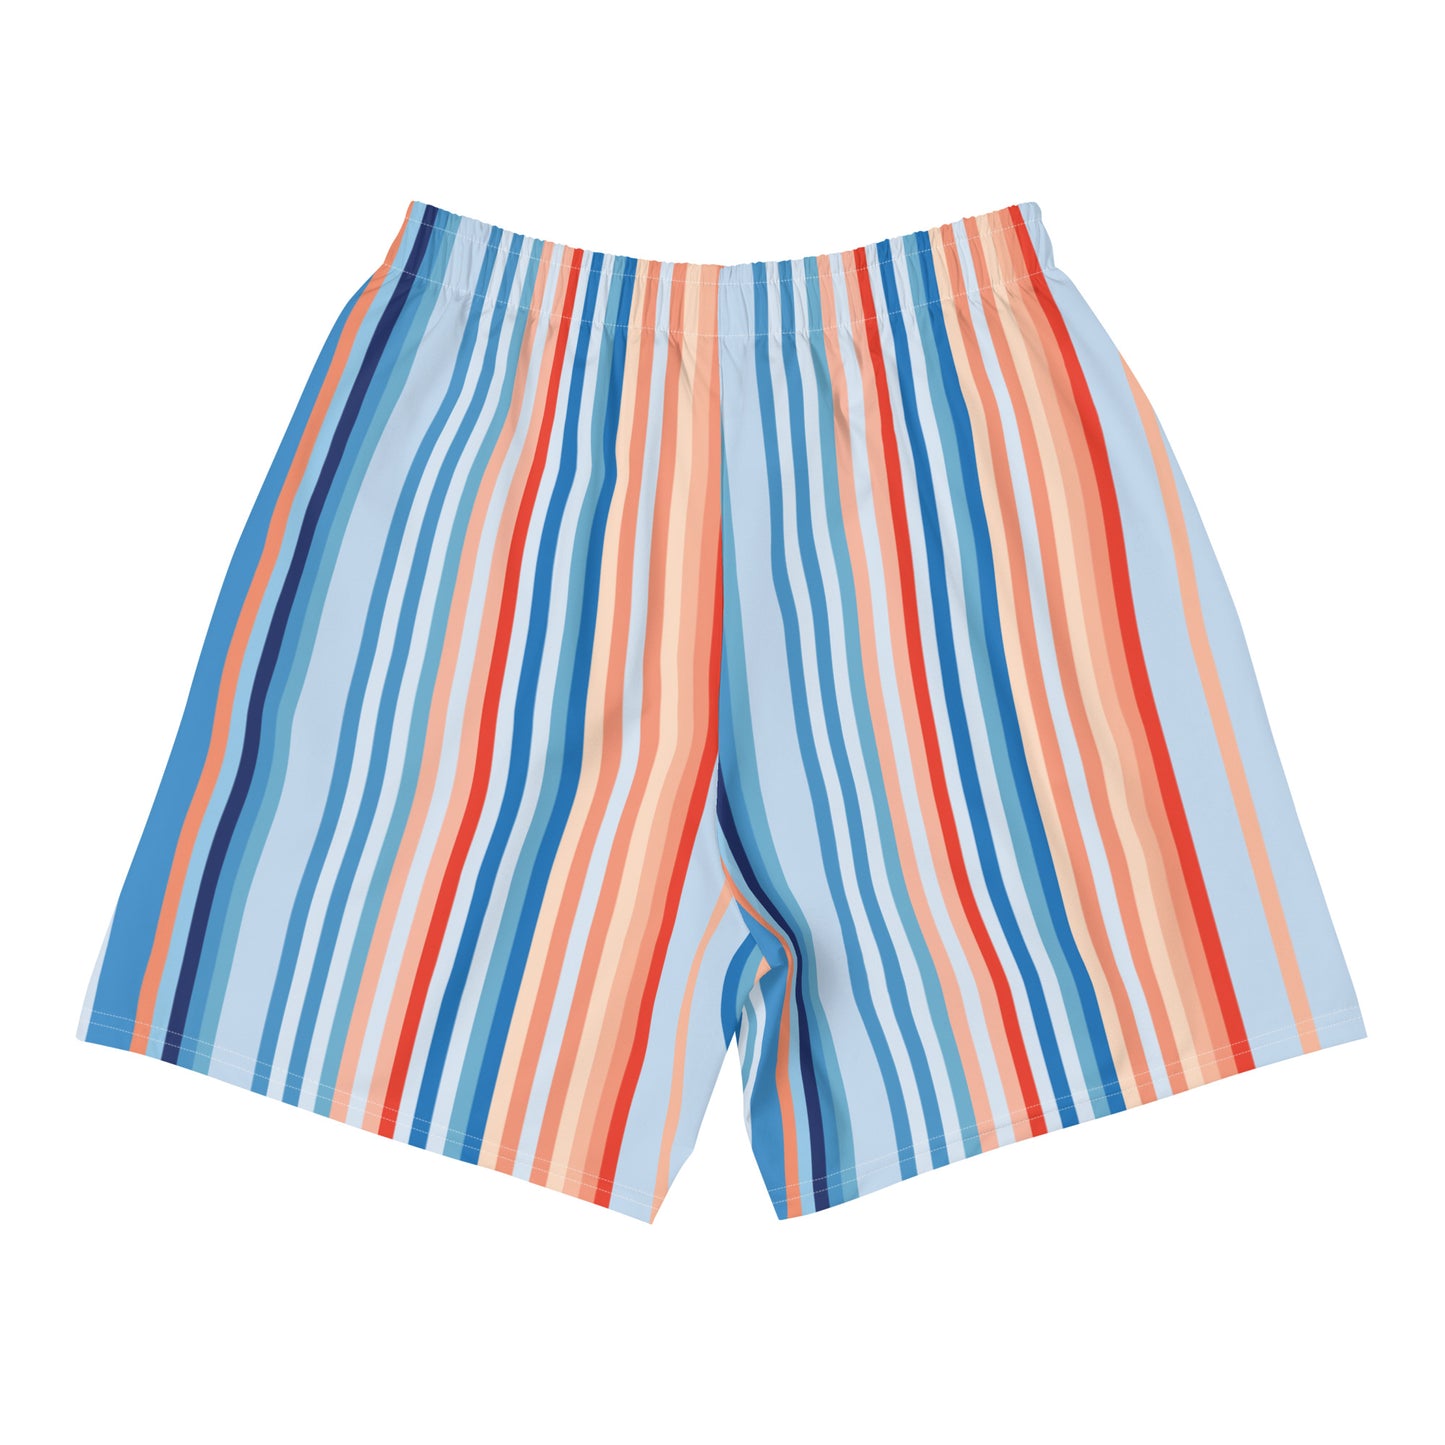 Climate Change Global Warming Stripes - Sustainably Made Men's Shorts Vertical